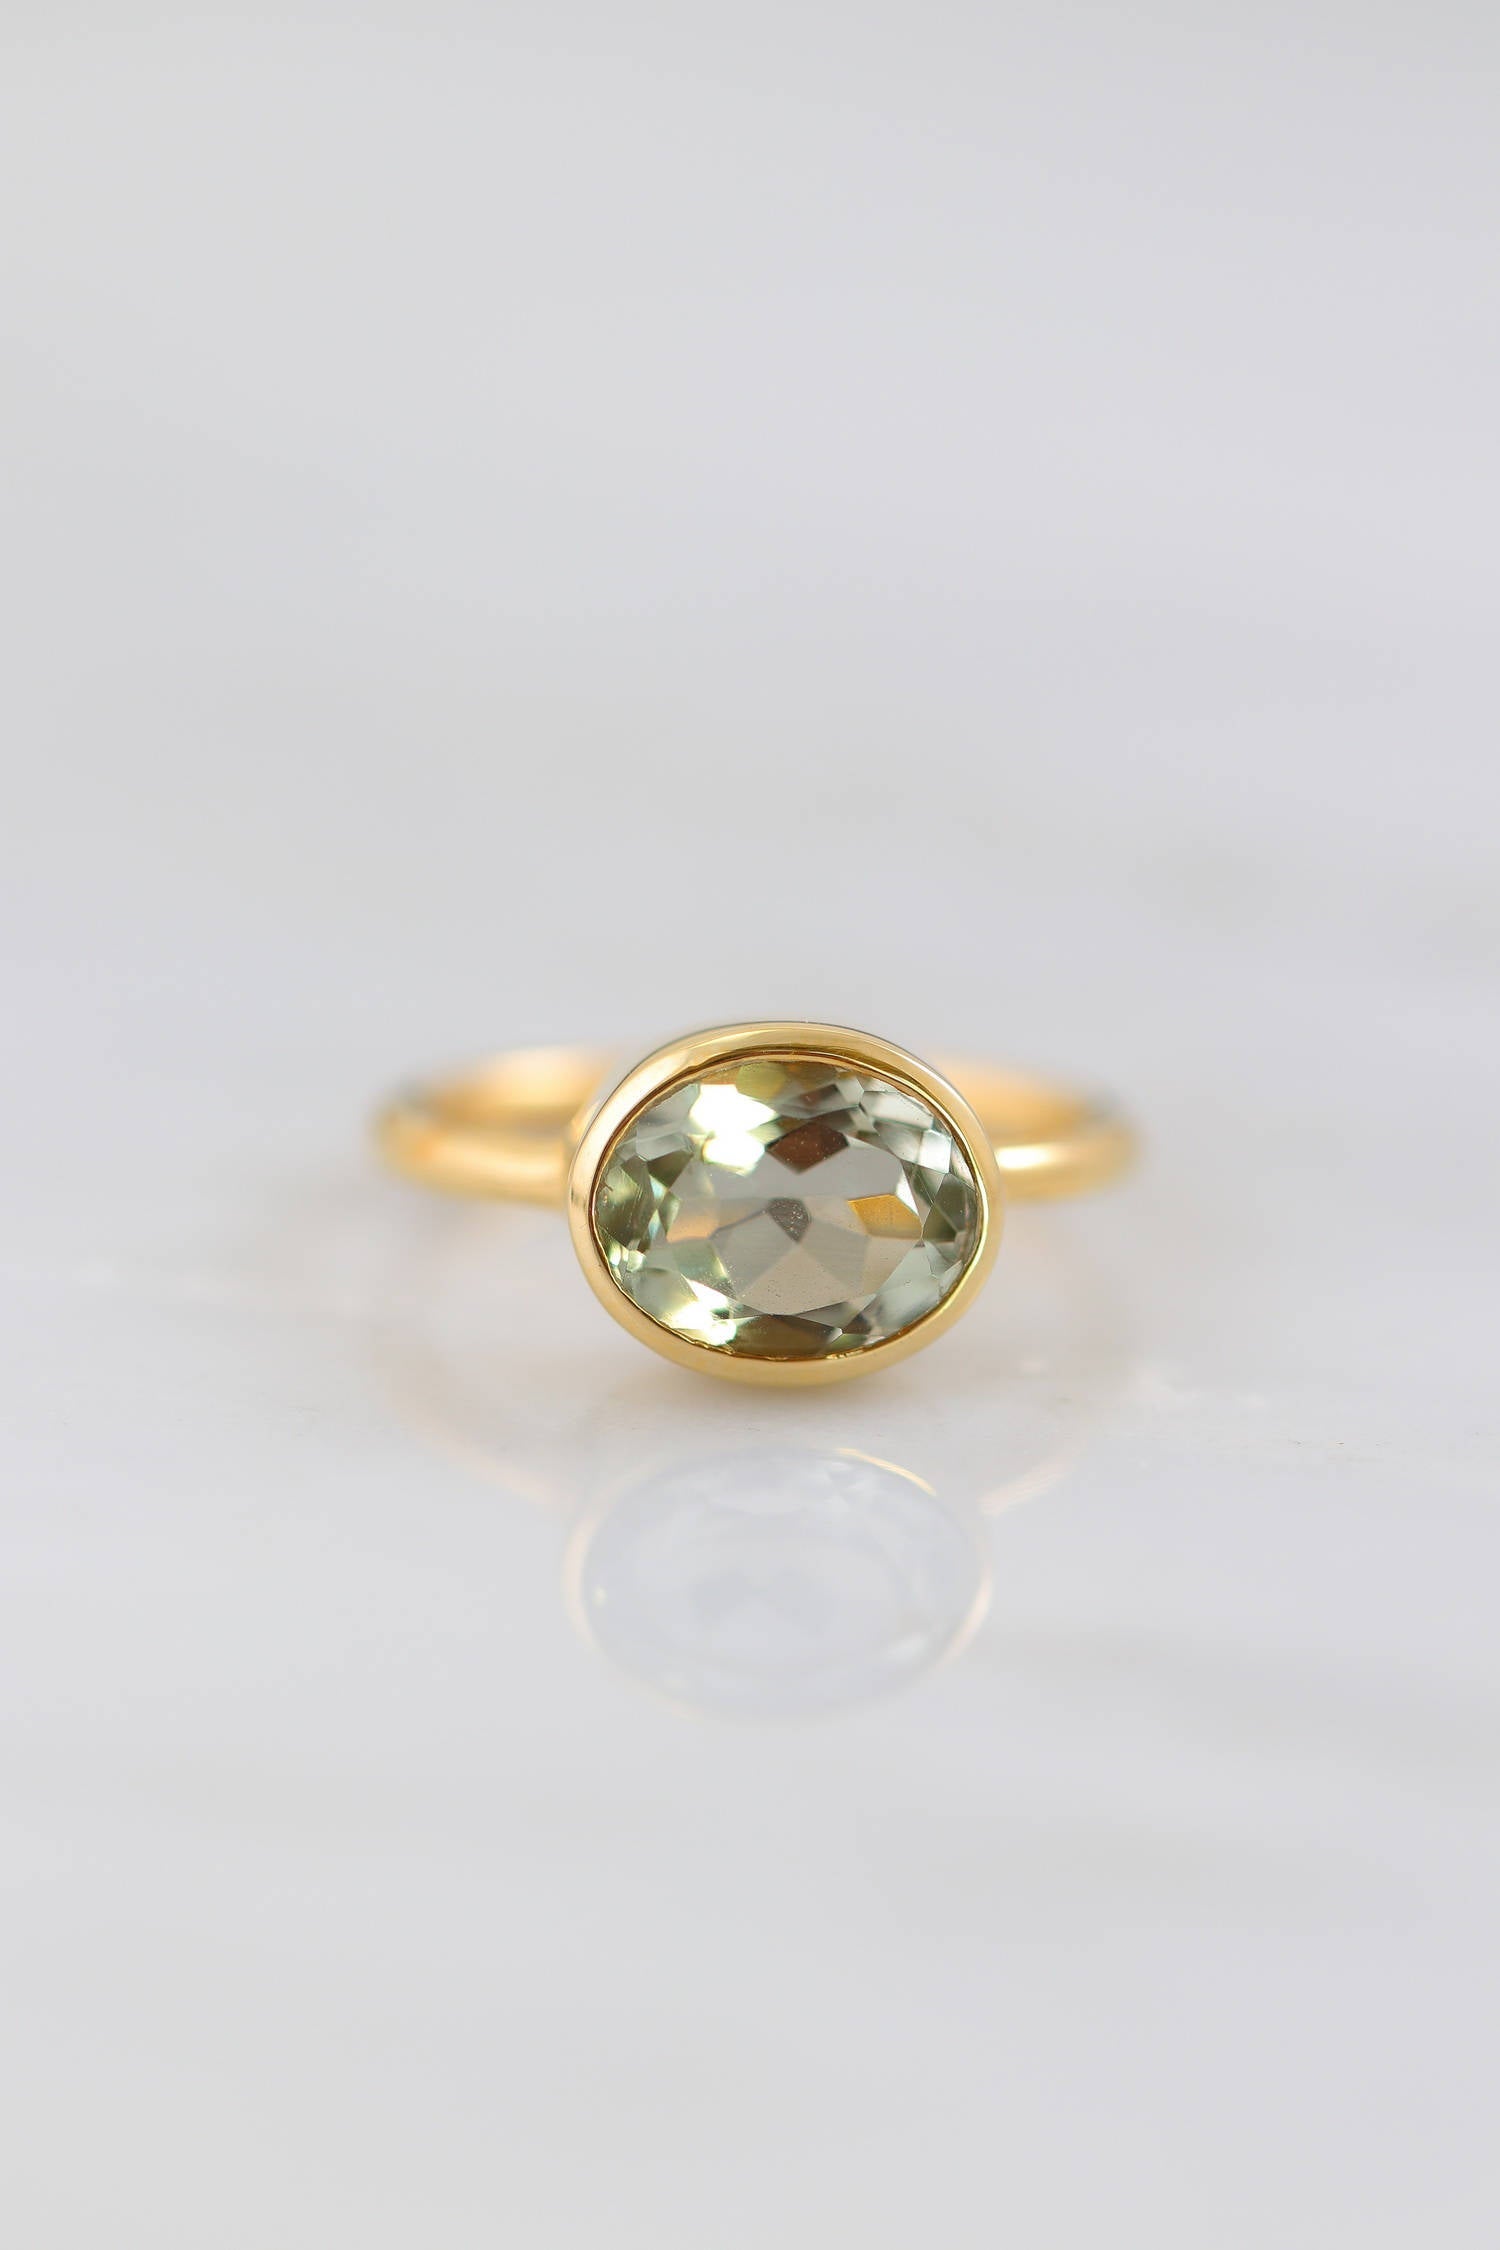 Green Amethyst Ring, Oval Ring, Bezel set ring, February Birthstone Ring, Gemstone Ring, Stacking Ring, Gold Ring, Bridal jewelry